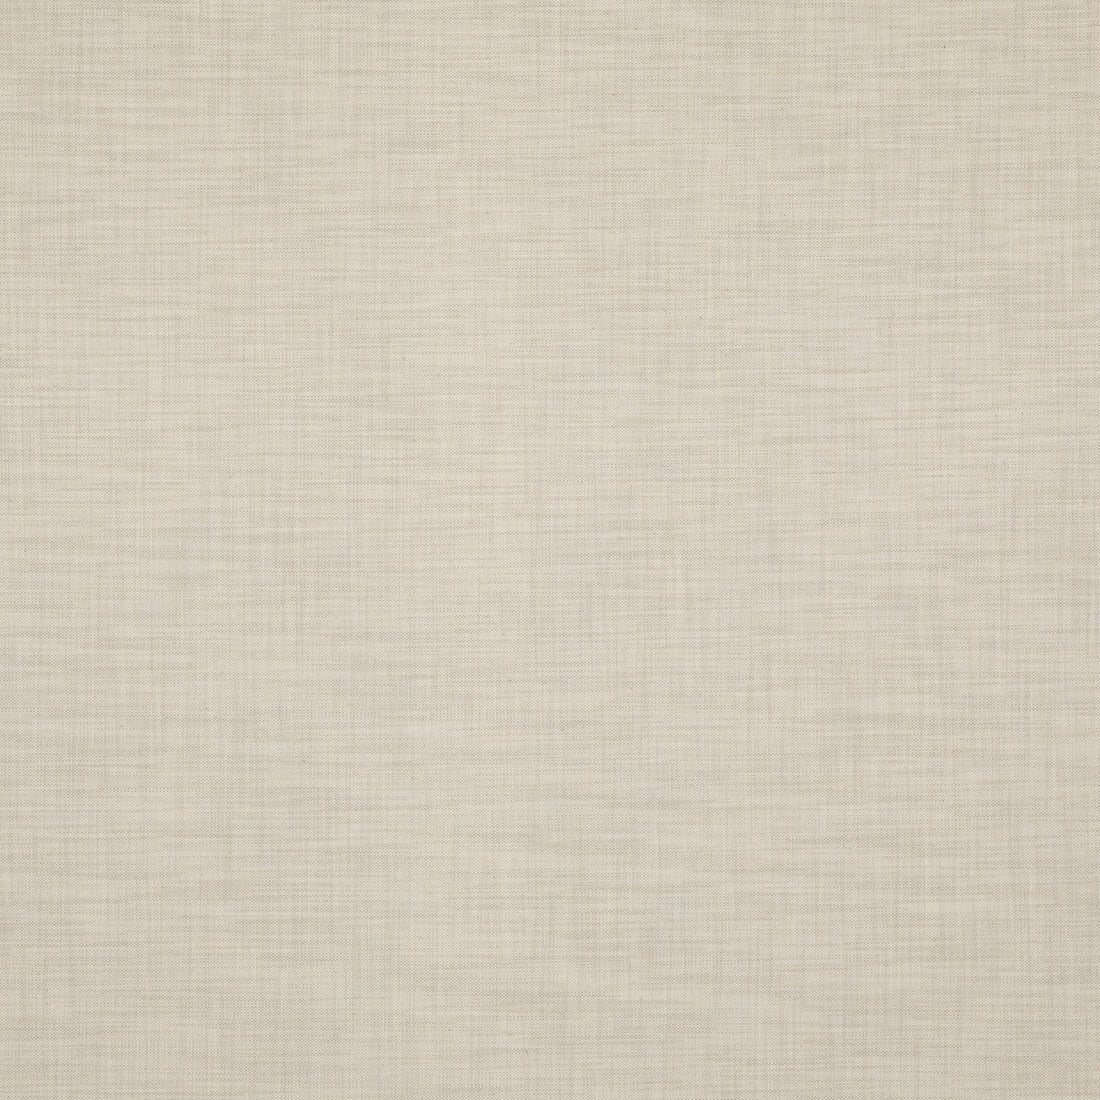 Kalahari fabric in ivory color - pattern ED85316.104.0 - by Threads in the Luxury Weaves II collection